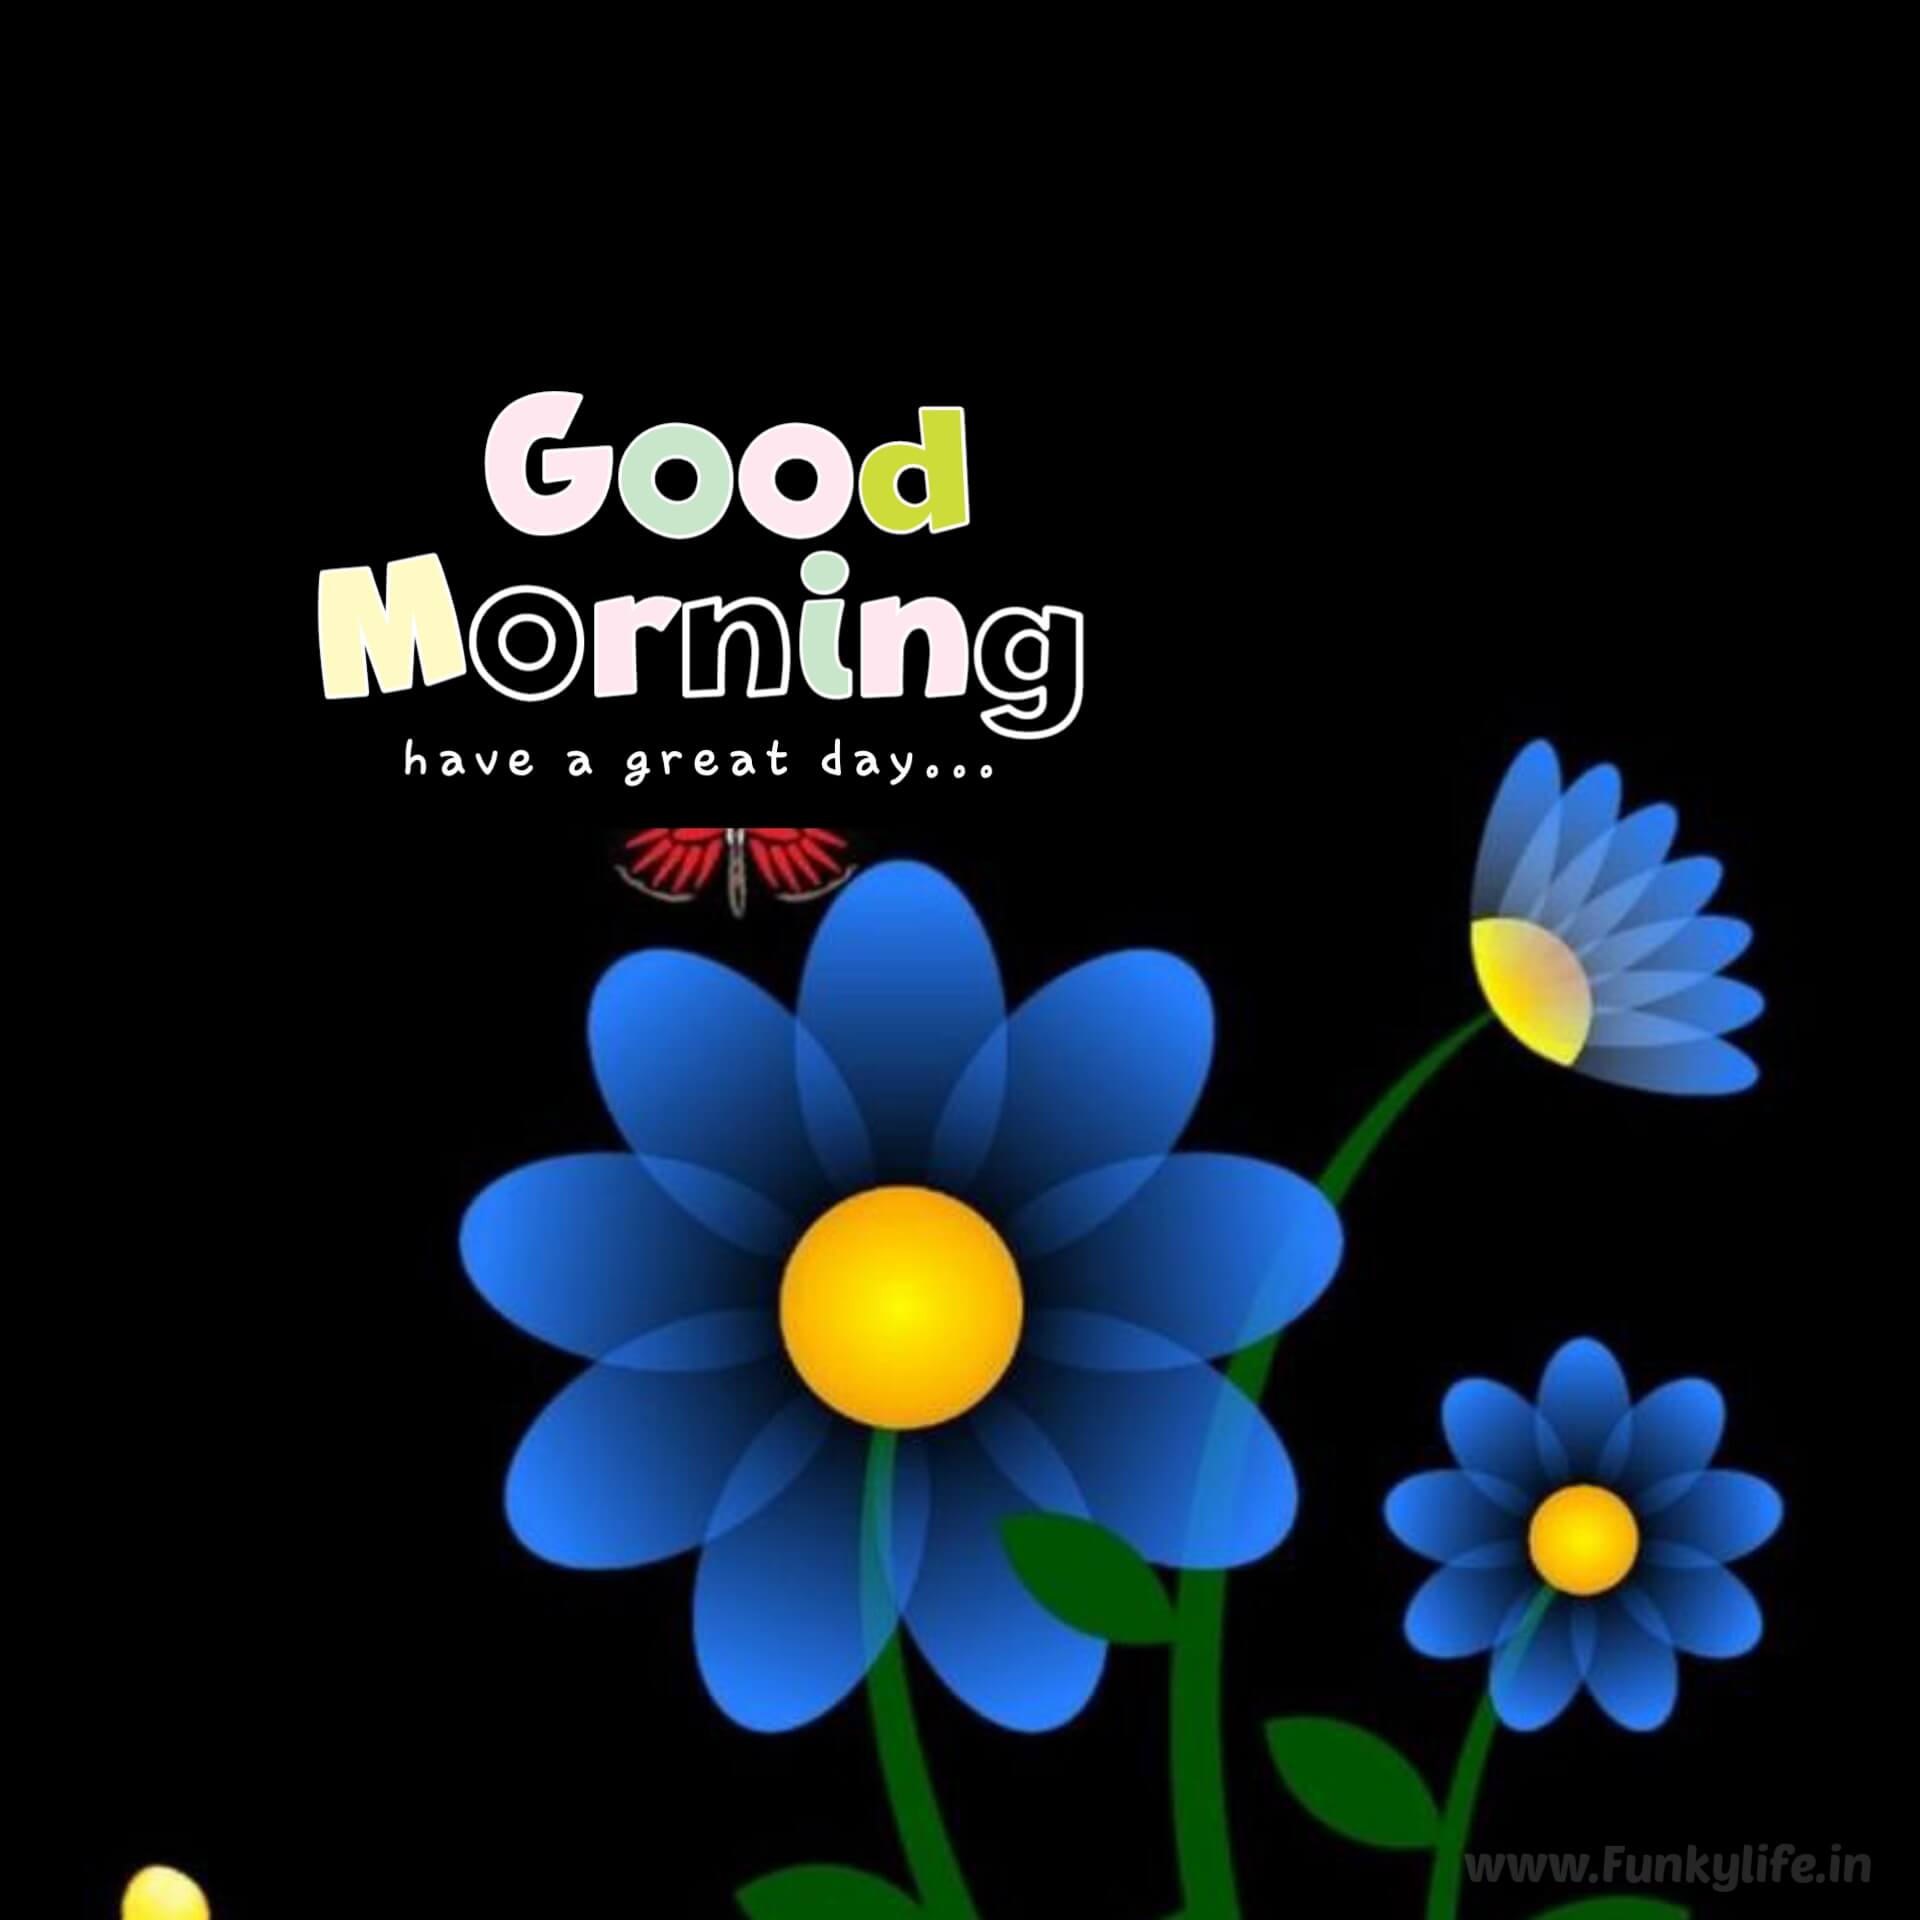 Good Morning Animated Images 